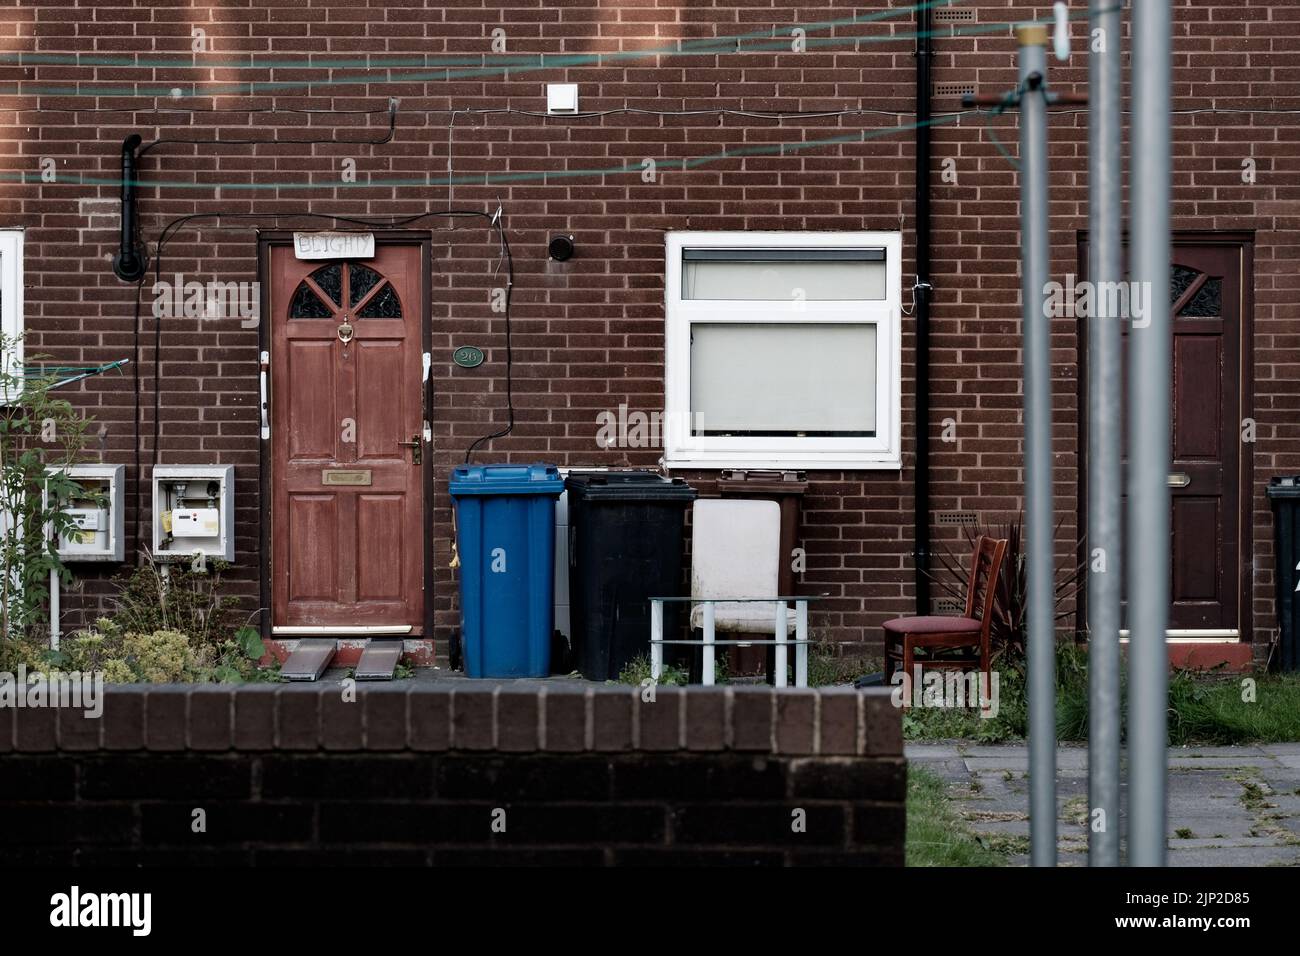 Council Flat in North West England with a cardboard sign above the door reading 'Blighty' Stock Photo